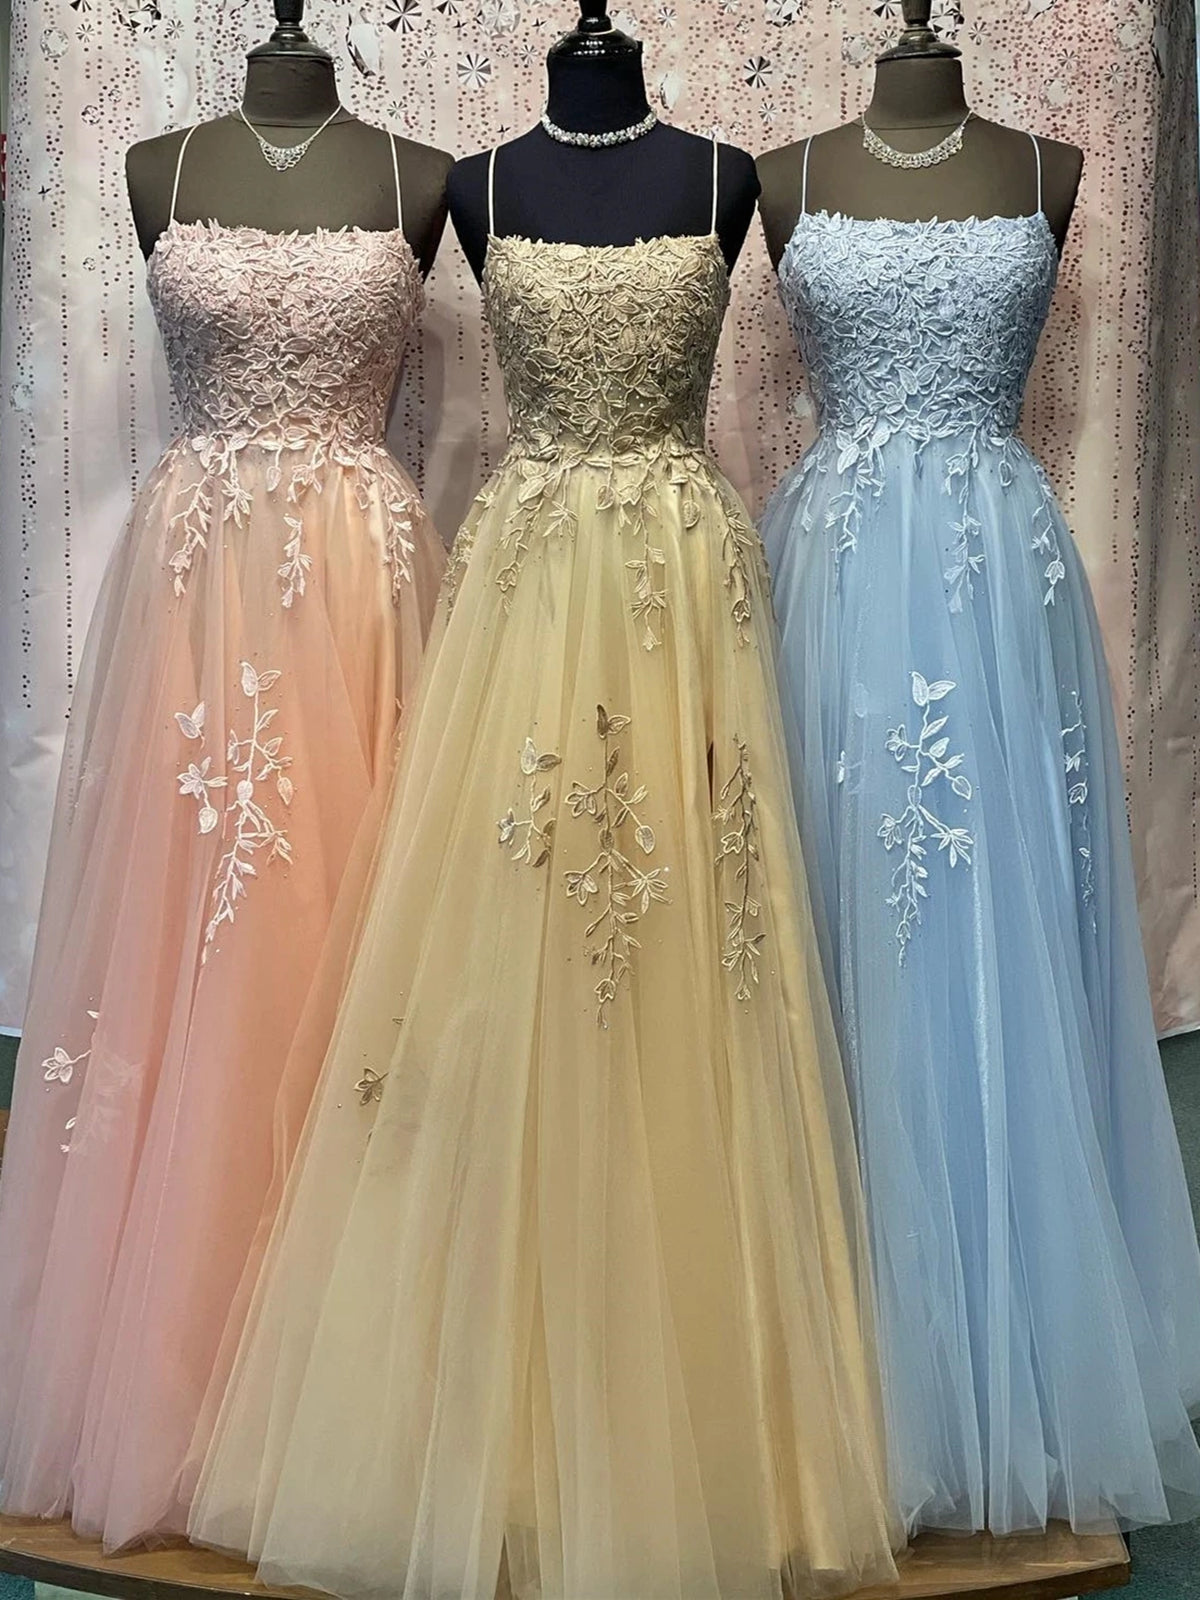 Elegant tti Straps Beaded Pink/Champagne/Blue Lace Tulle Long Prom Dresses, Pink/Champagne/Blue Lace Formal Graduation Evening Dresses 